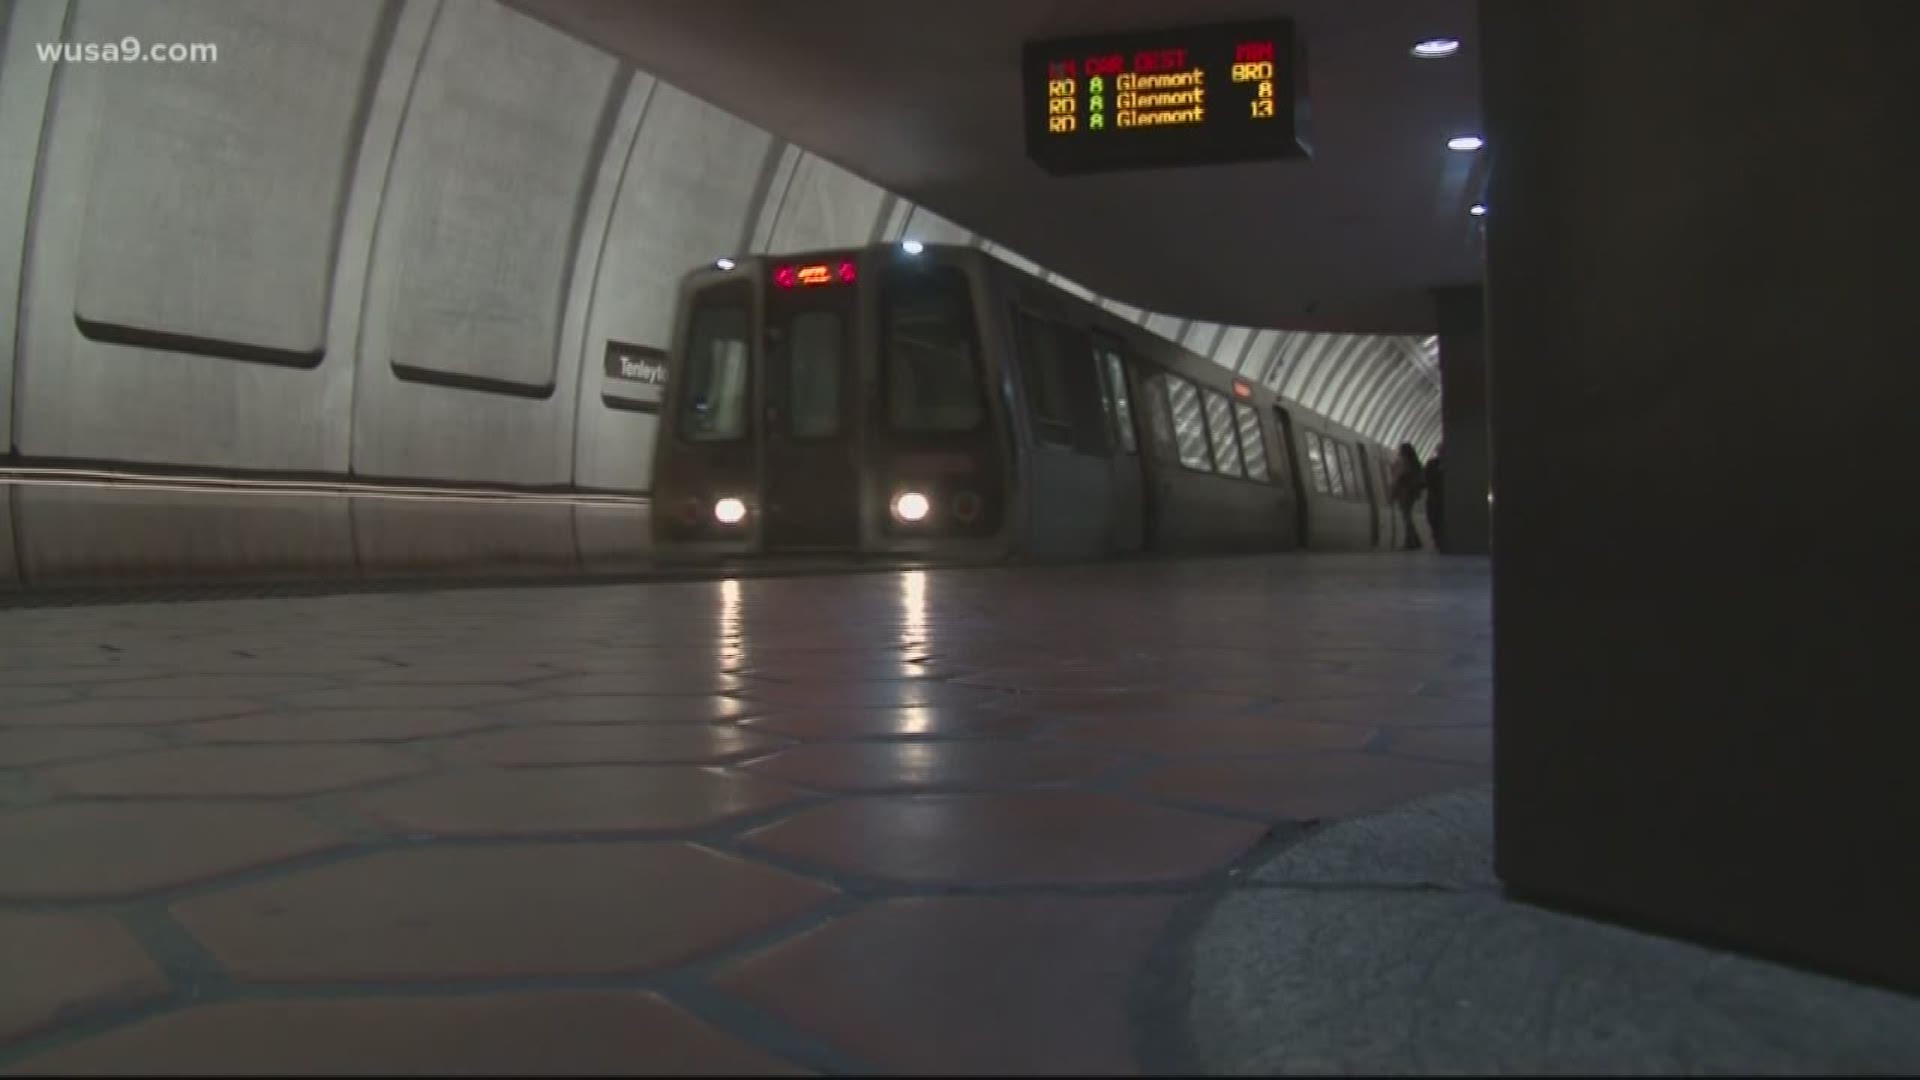 Metro says it is now losing $50 million a month and is requesting emergency federal funding.